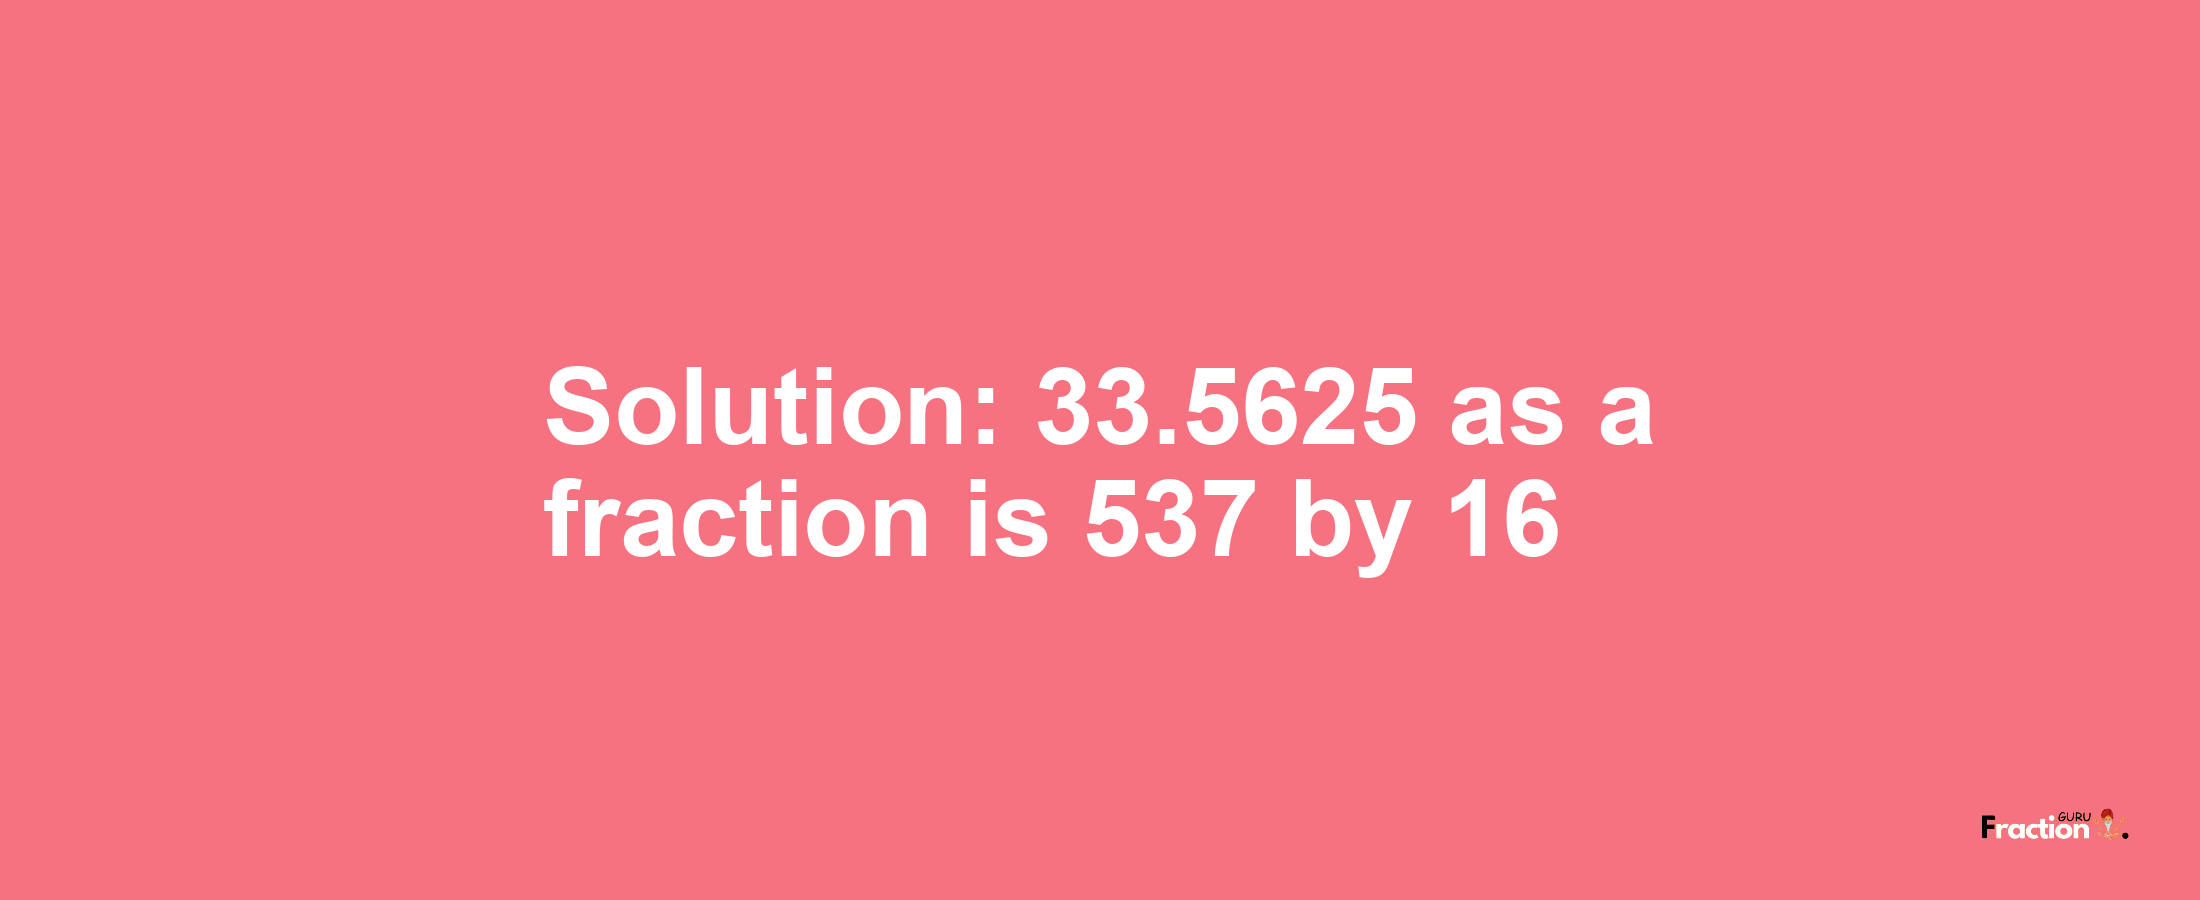 Solution:33.5625 as a fraction is 537/16